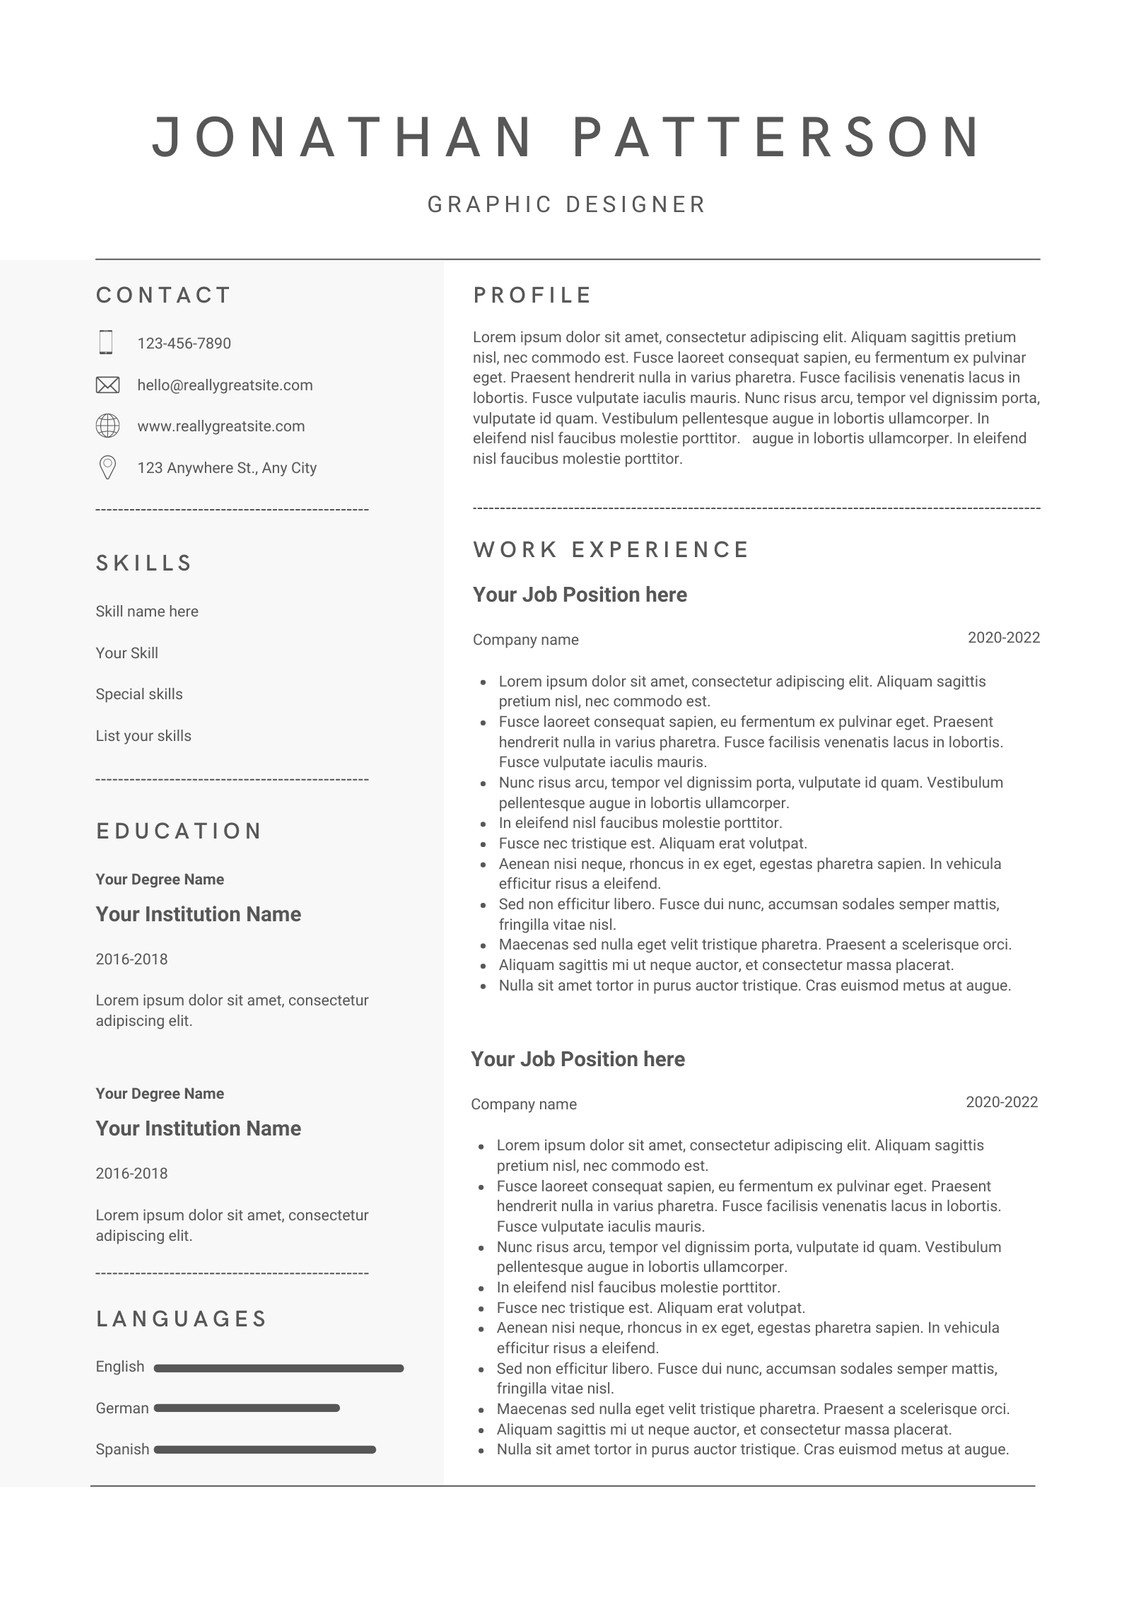 Free Printable Resume Templates You Can Customize | Canva pertaining to Free Printable Resume Templates Download